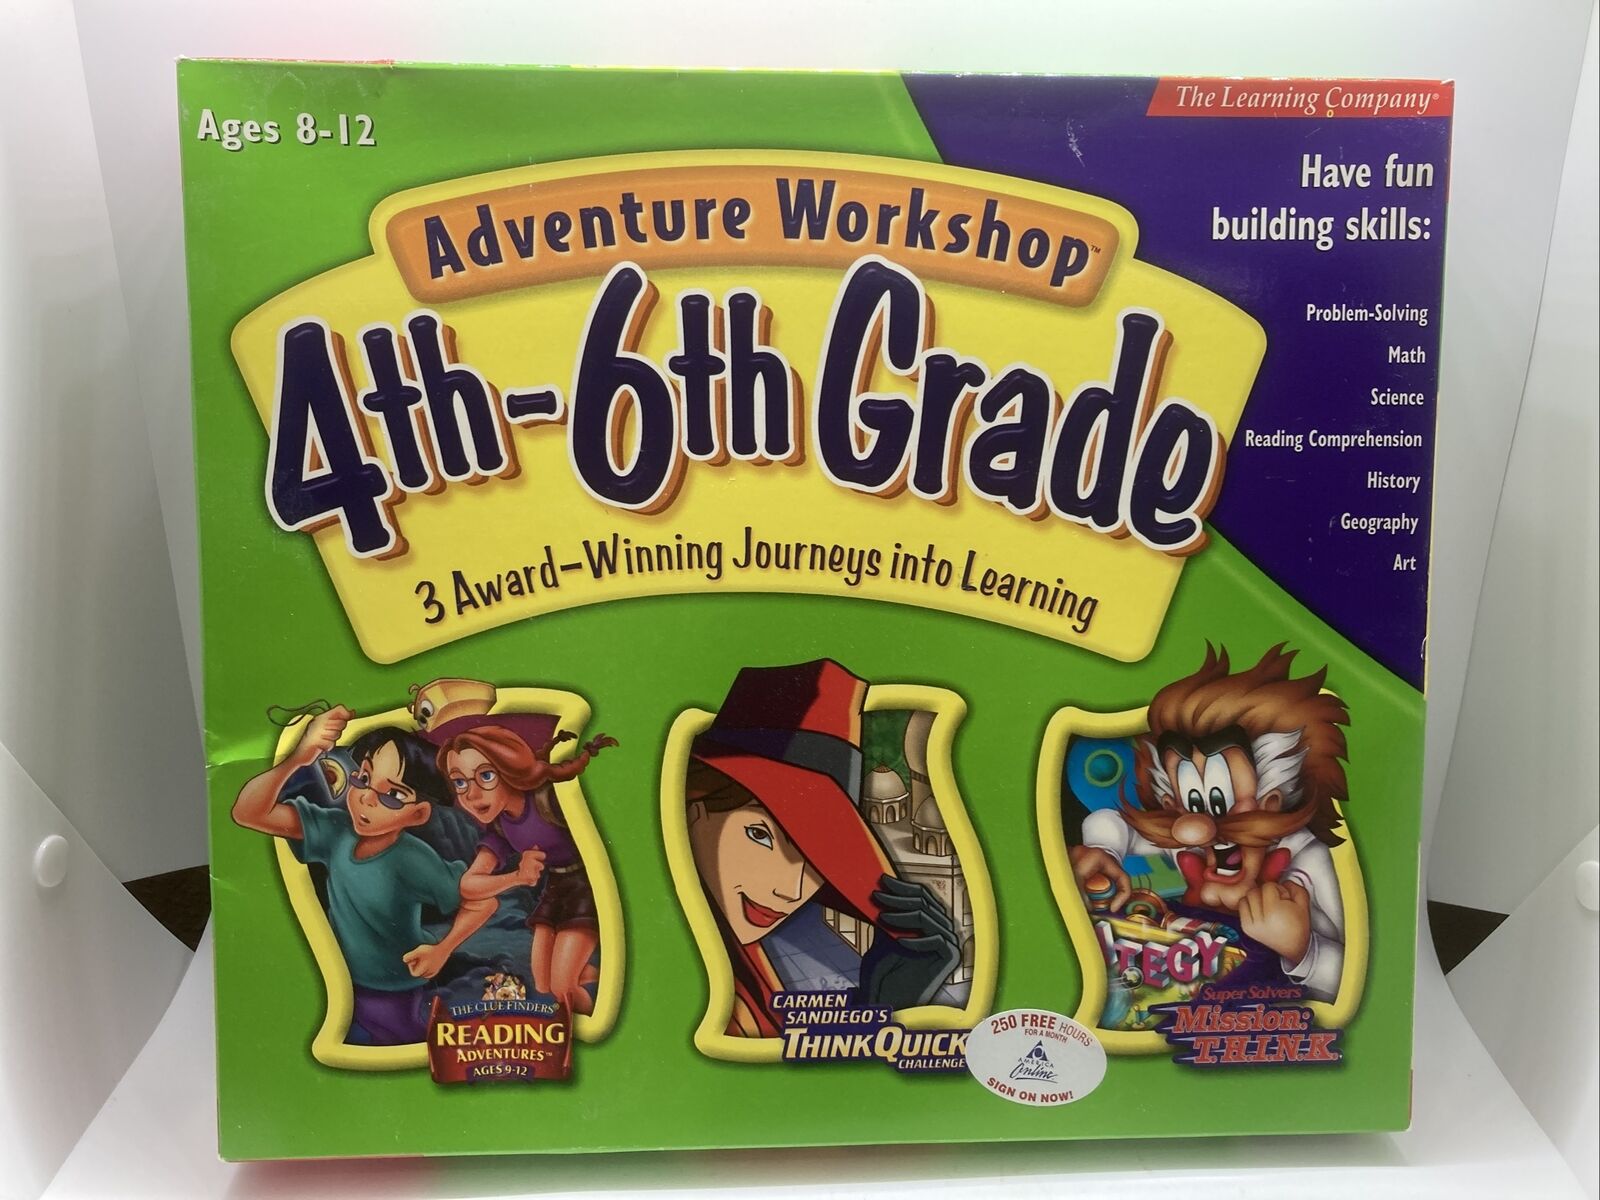 The Learning Company Adventure 4th-6th Grade Clue Finders Carmen Sandiego Read